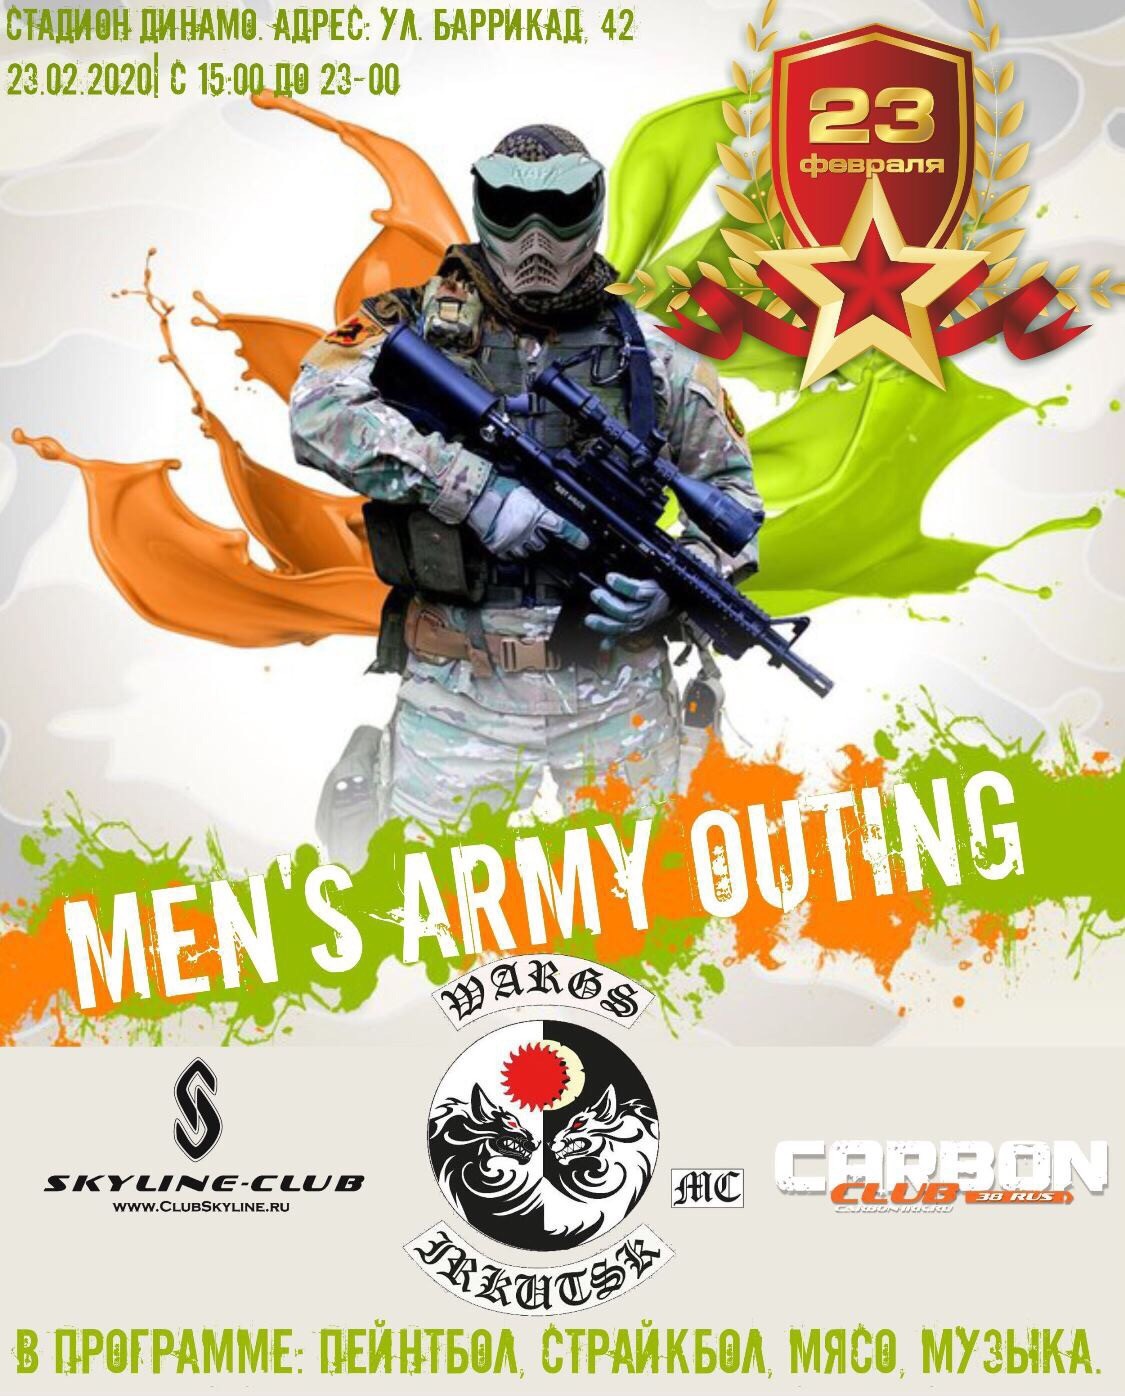 Men’s Army Outing 23.02.2020